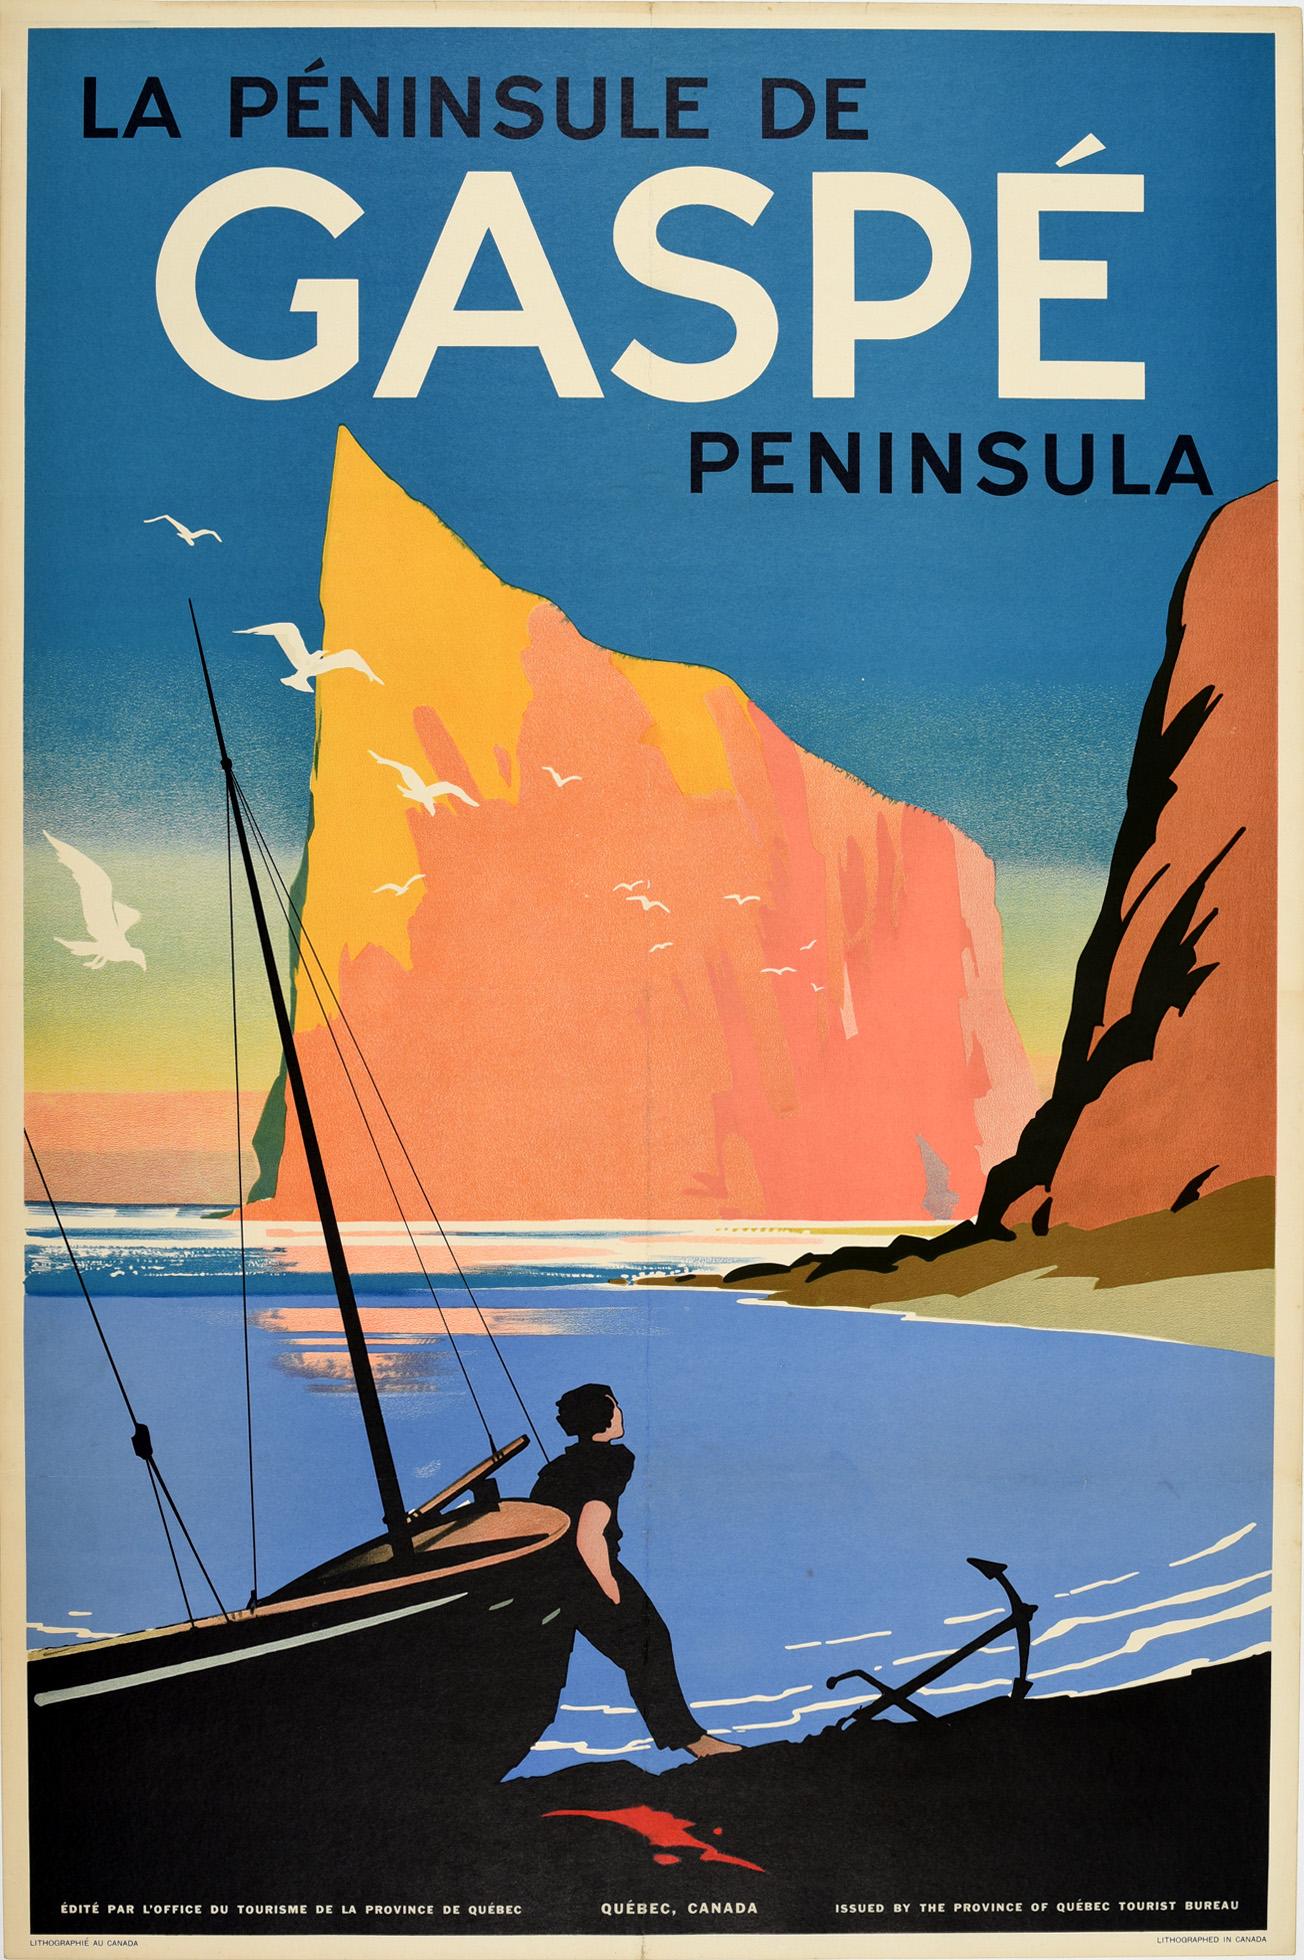 Unknown Print – Original Vintage Travel Poster For The Gaspe Peninsula In Canada Quebec Province